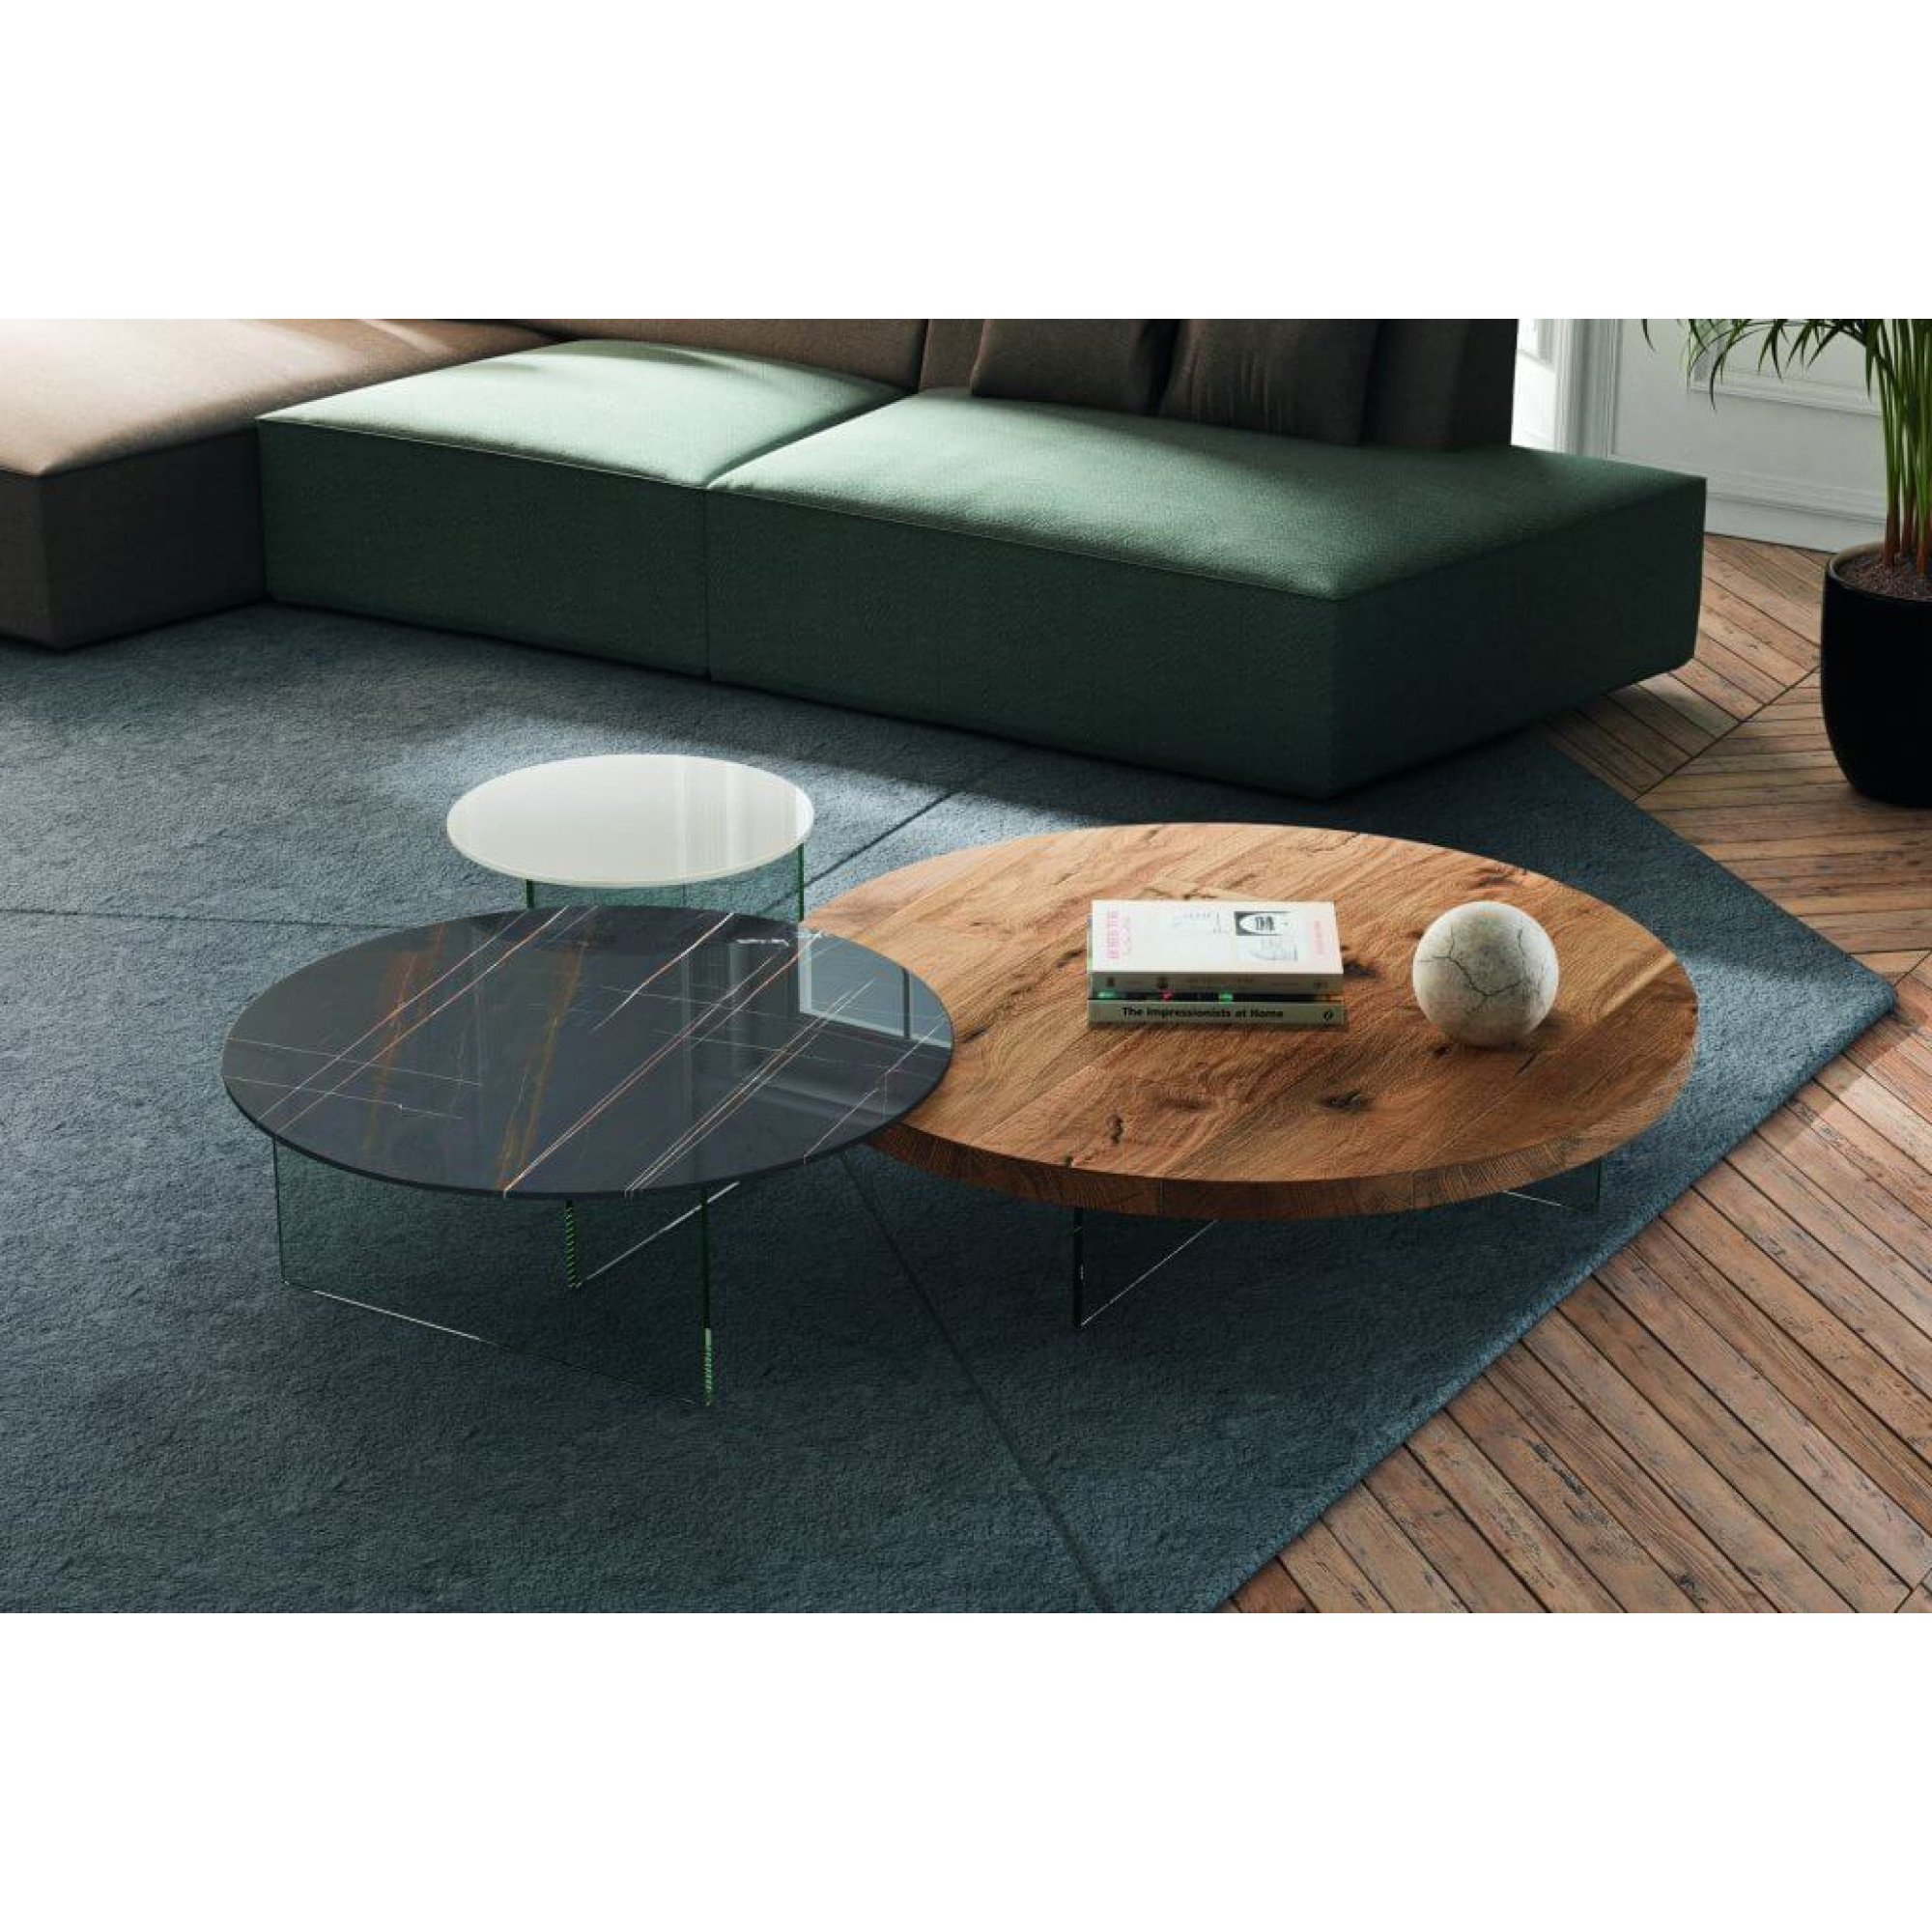 Rounded Wood Slats Oval Coffee Table, Modern Living Room Furniture